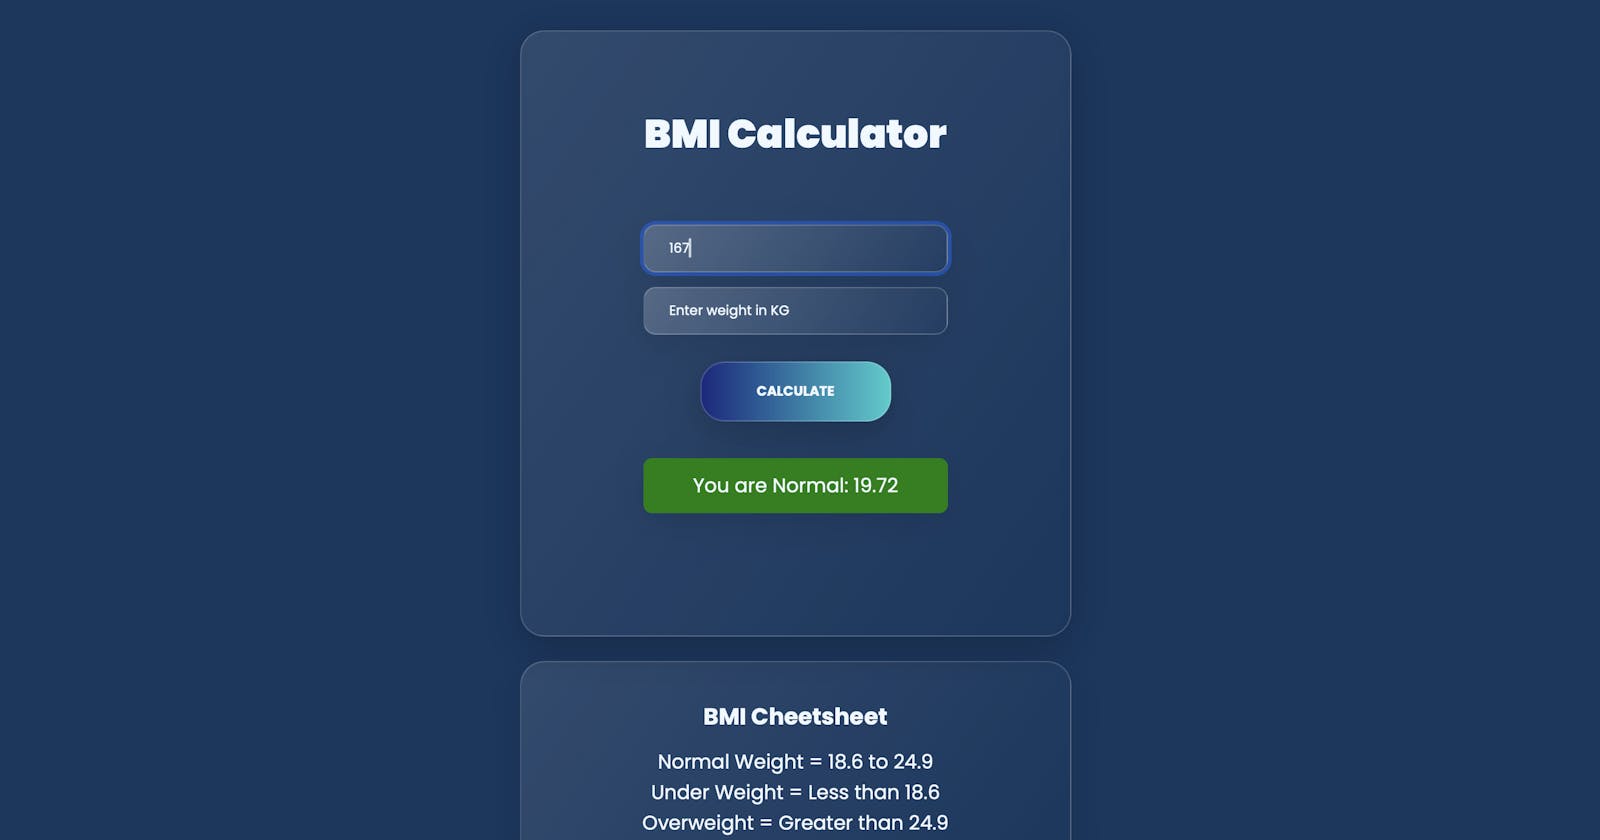 Building a BMI Calculator with Glassmorphism UI using HTML, CSS, and JavaScript.